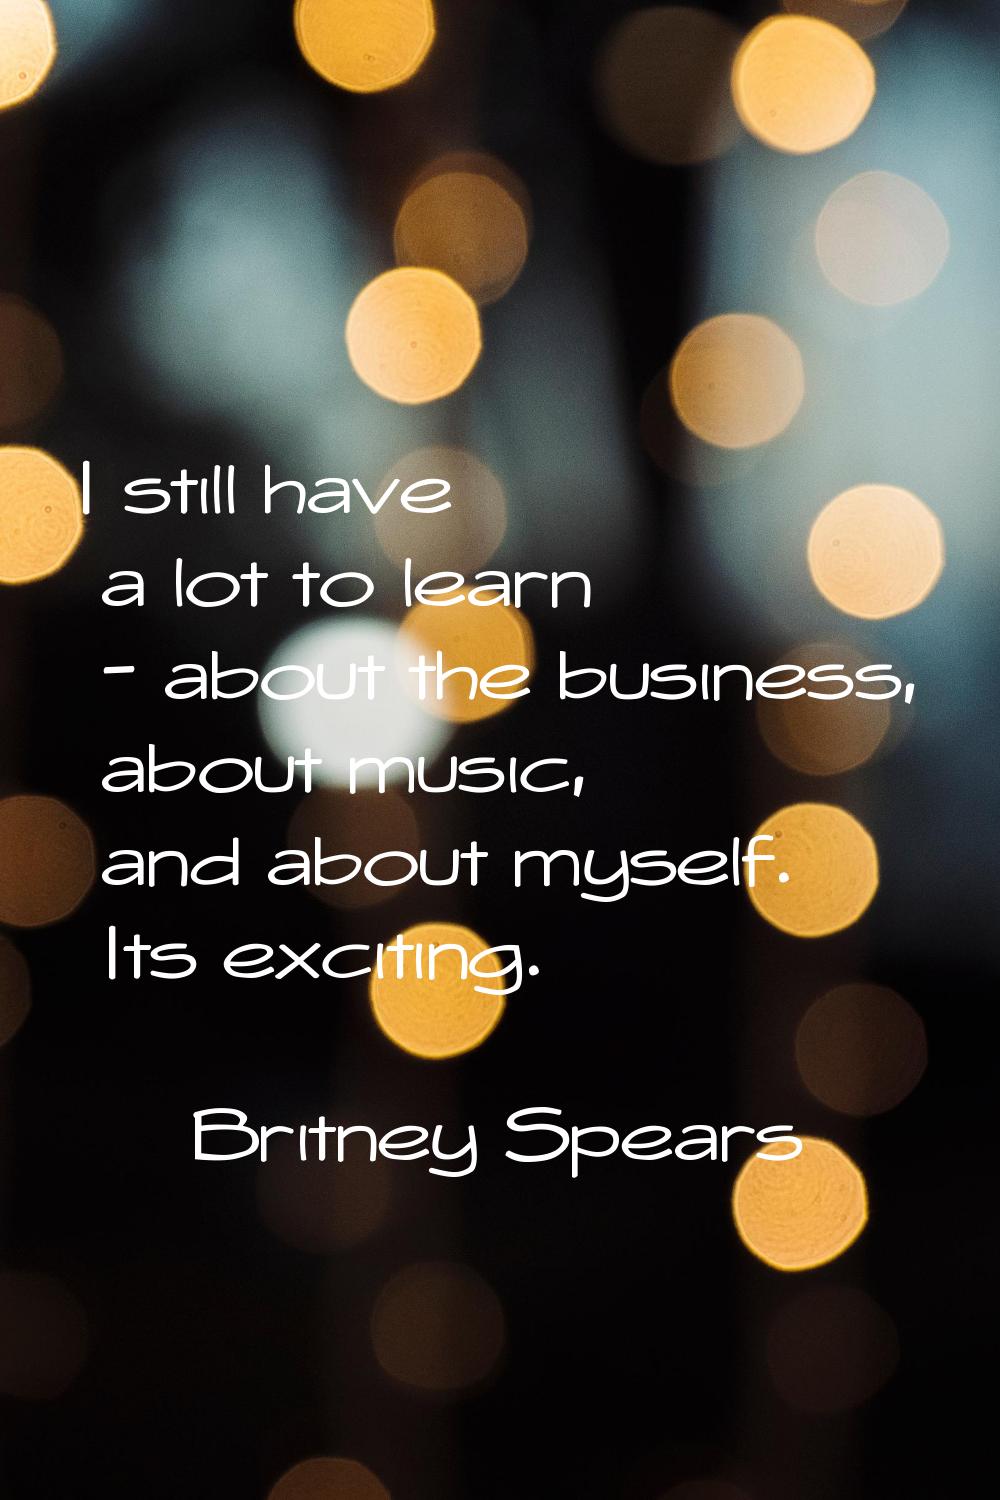 I still have a lot to learn - about the business, about music, and about myself. Its exciting.